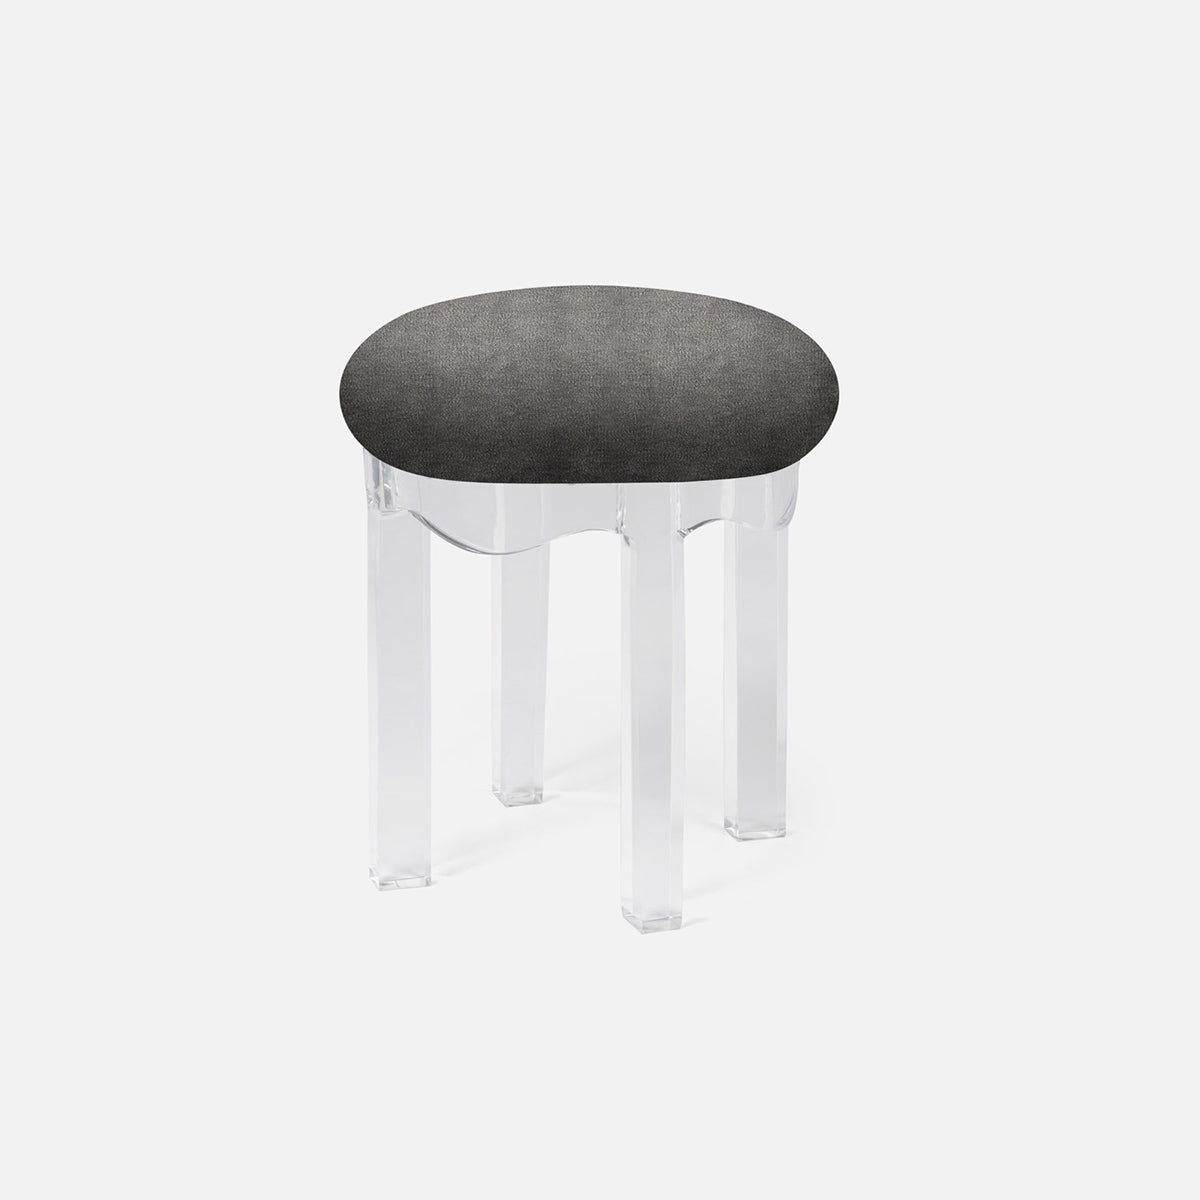 Made Goods Marston Upholstered Round Single Bench in Garonne Leather